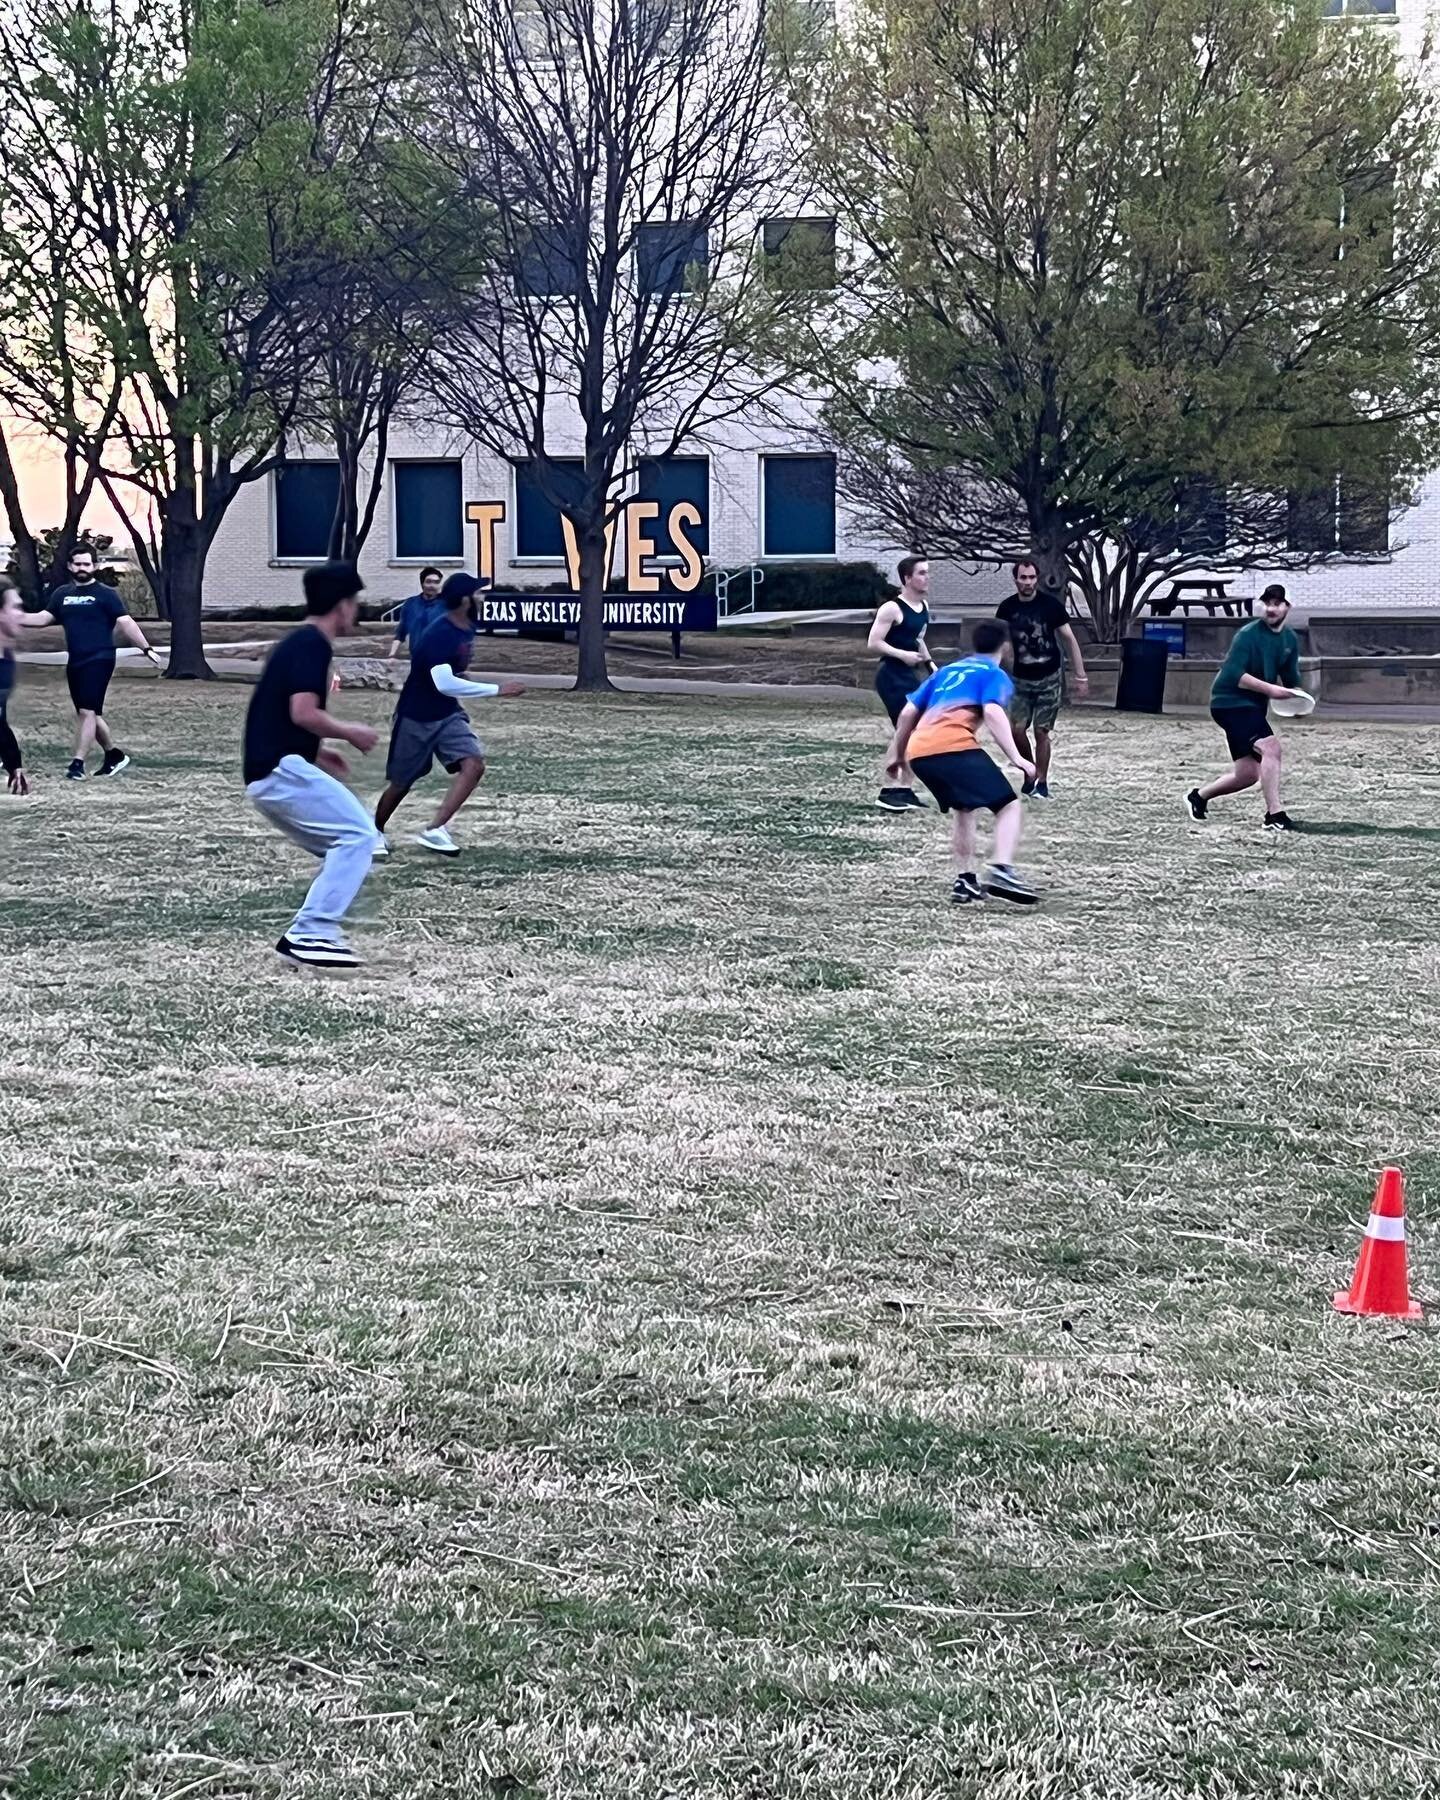 Thanks to everyone who came out to our ultimate frisbee night on Friday! We had a blast!